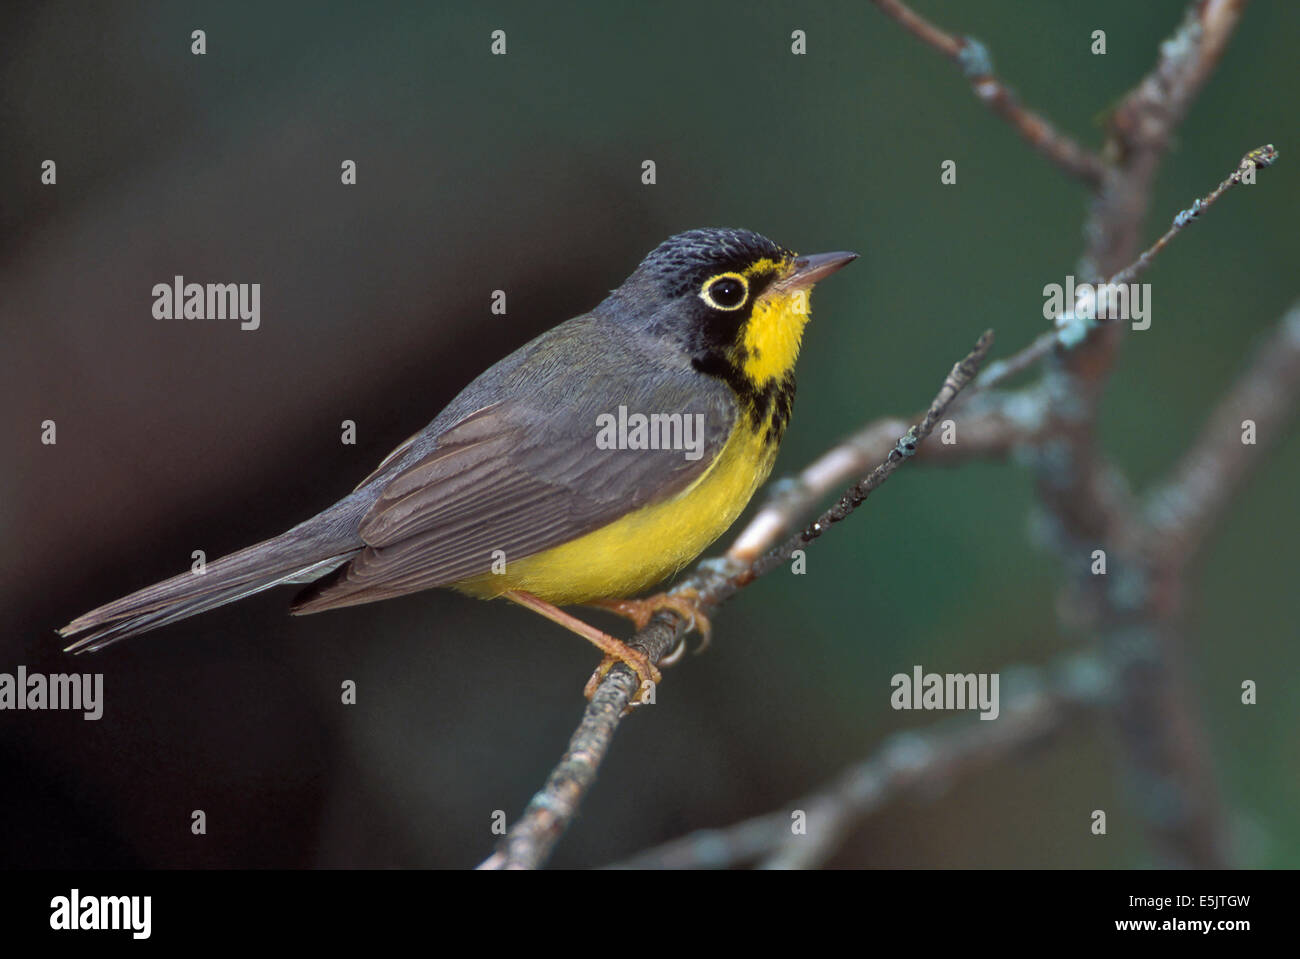 Canada Warbler - Wilsonia canadensis - Adult male Stock Photo